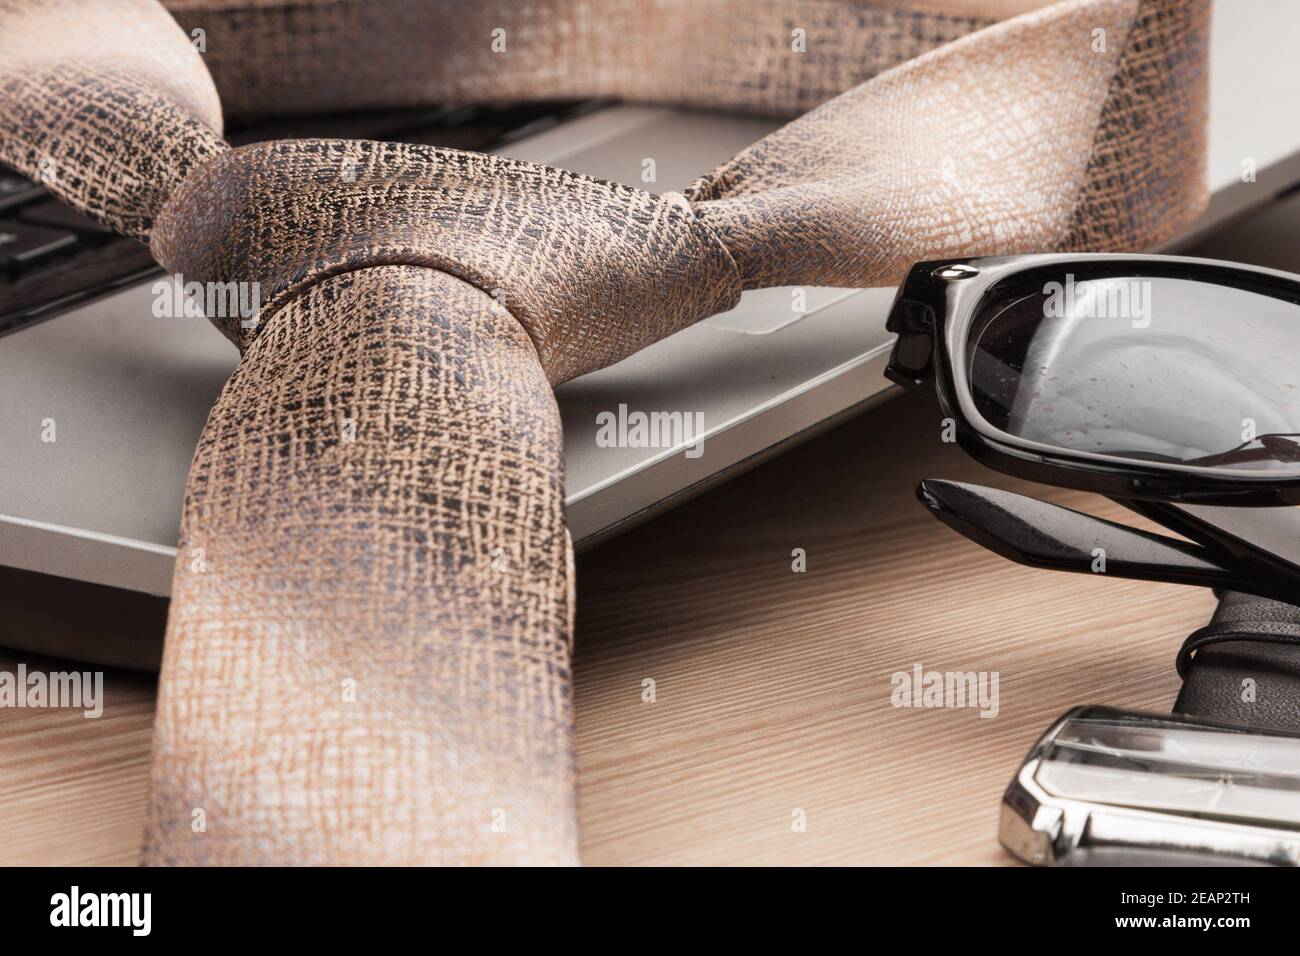 Fashion and business. Close-up, laptop and sunglasses, tie and watch, on a wooden table. Stock Photo